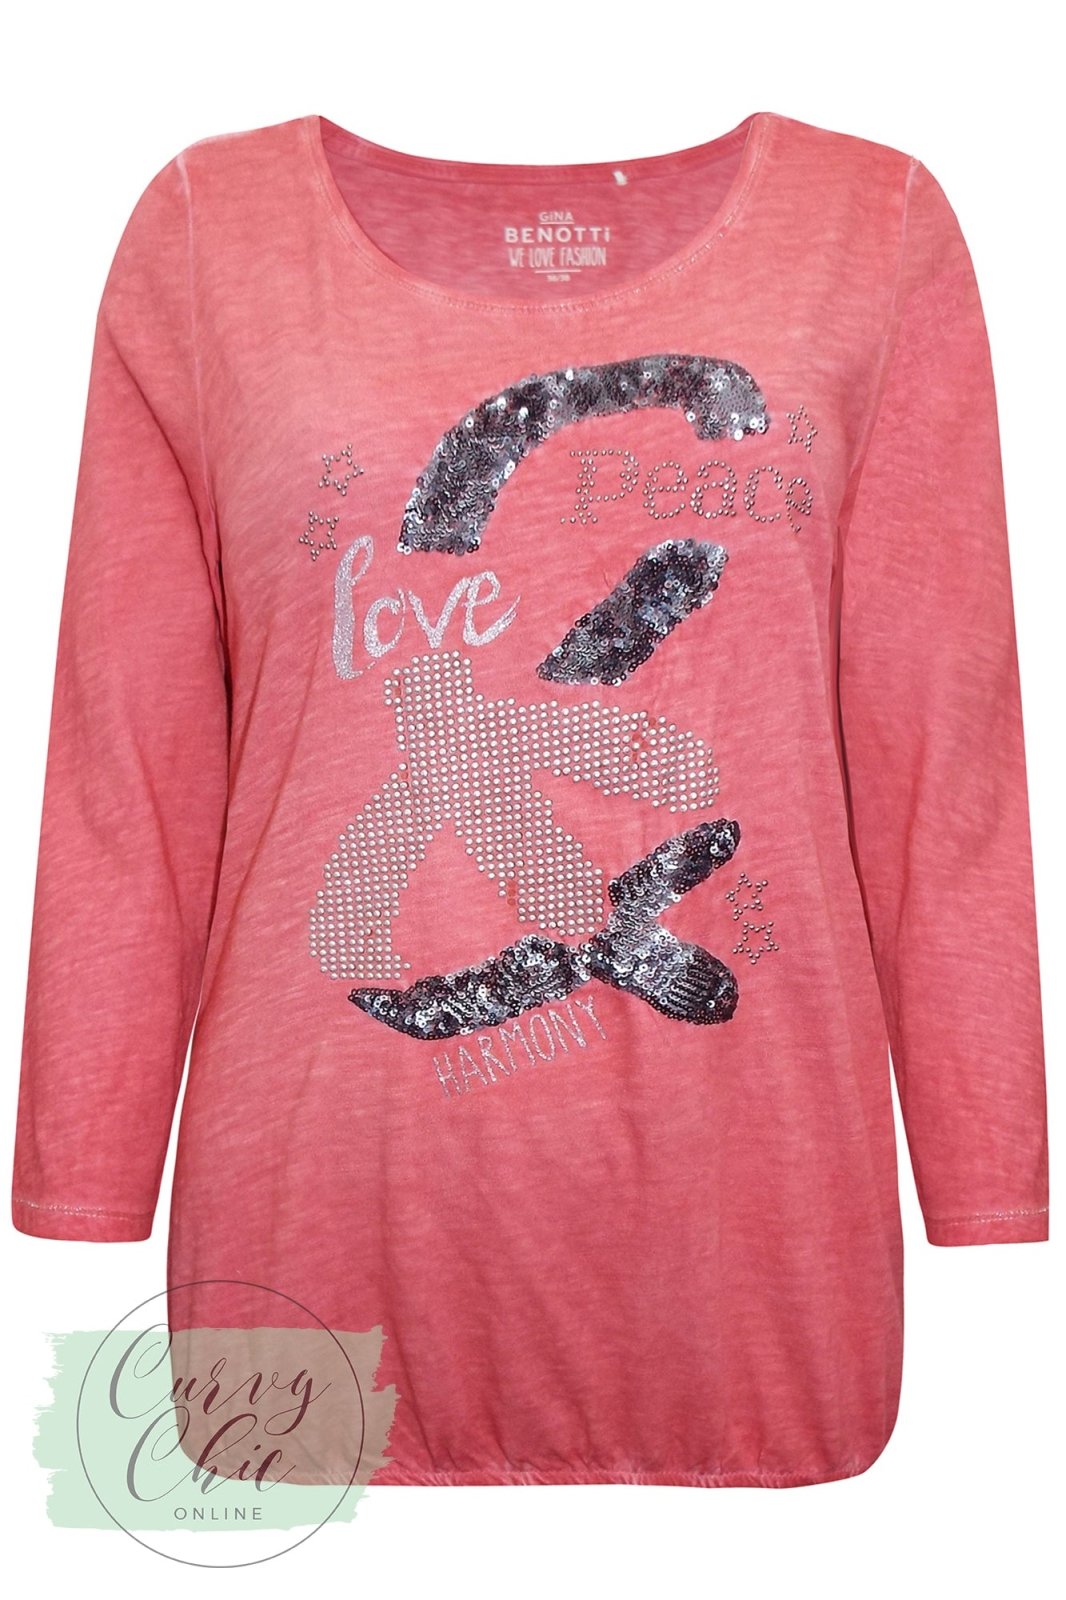 Red Love & Peace Plus Size Sequin Long Sleeve Top - Curvy Chic Boutique